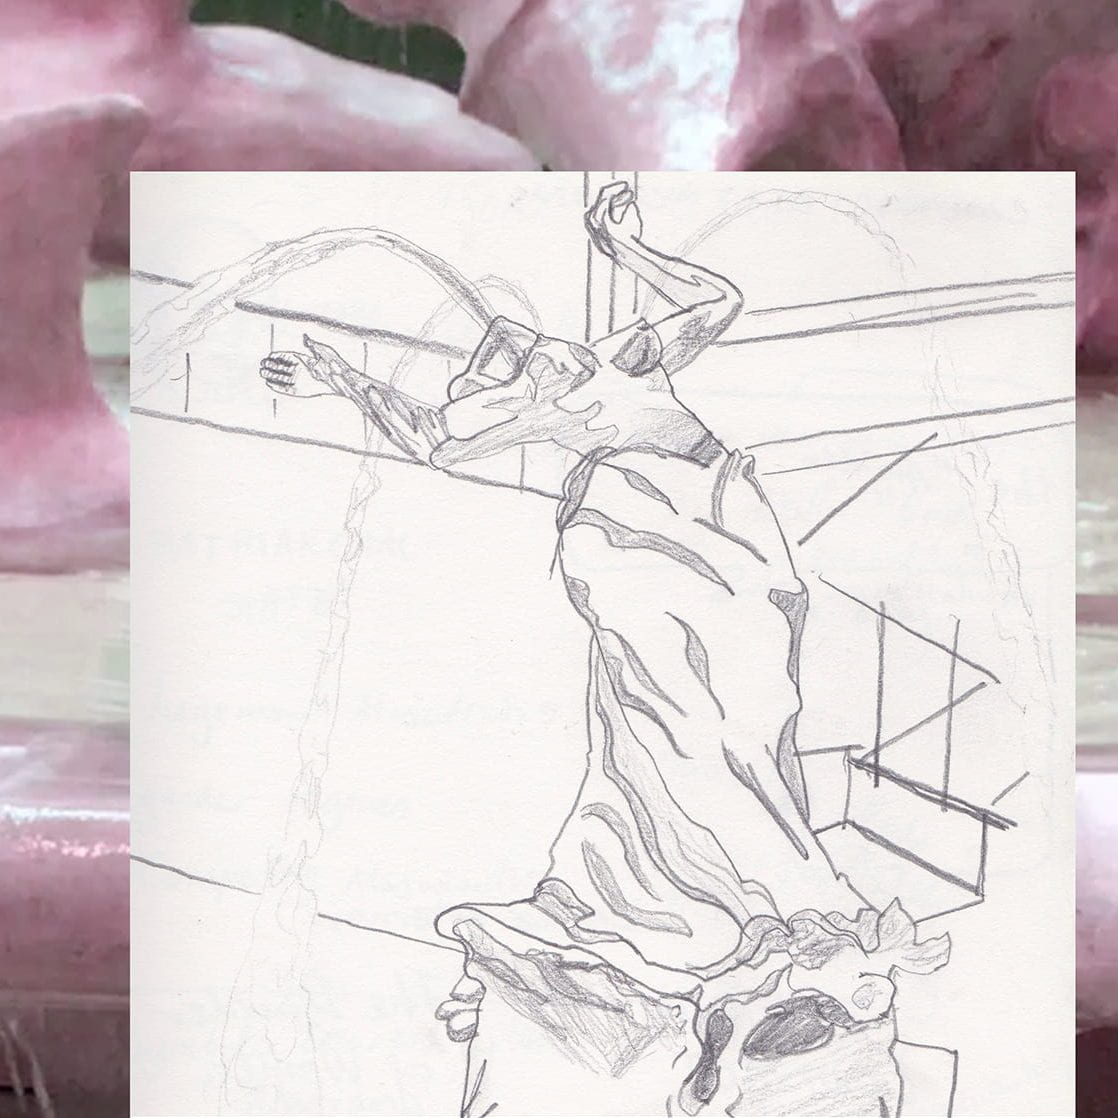 Drawing pencil on paper of the statue by Kara Walker superimposed on photograph of the statue.